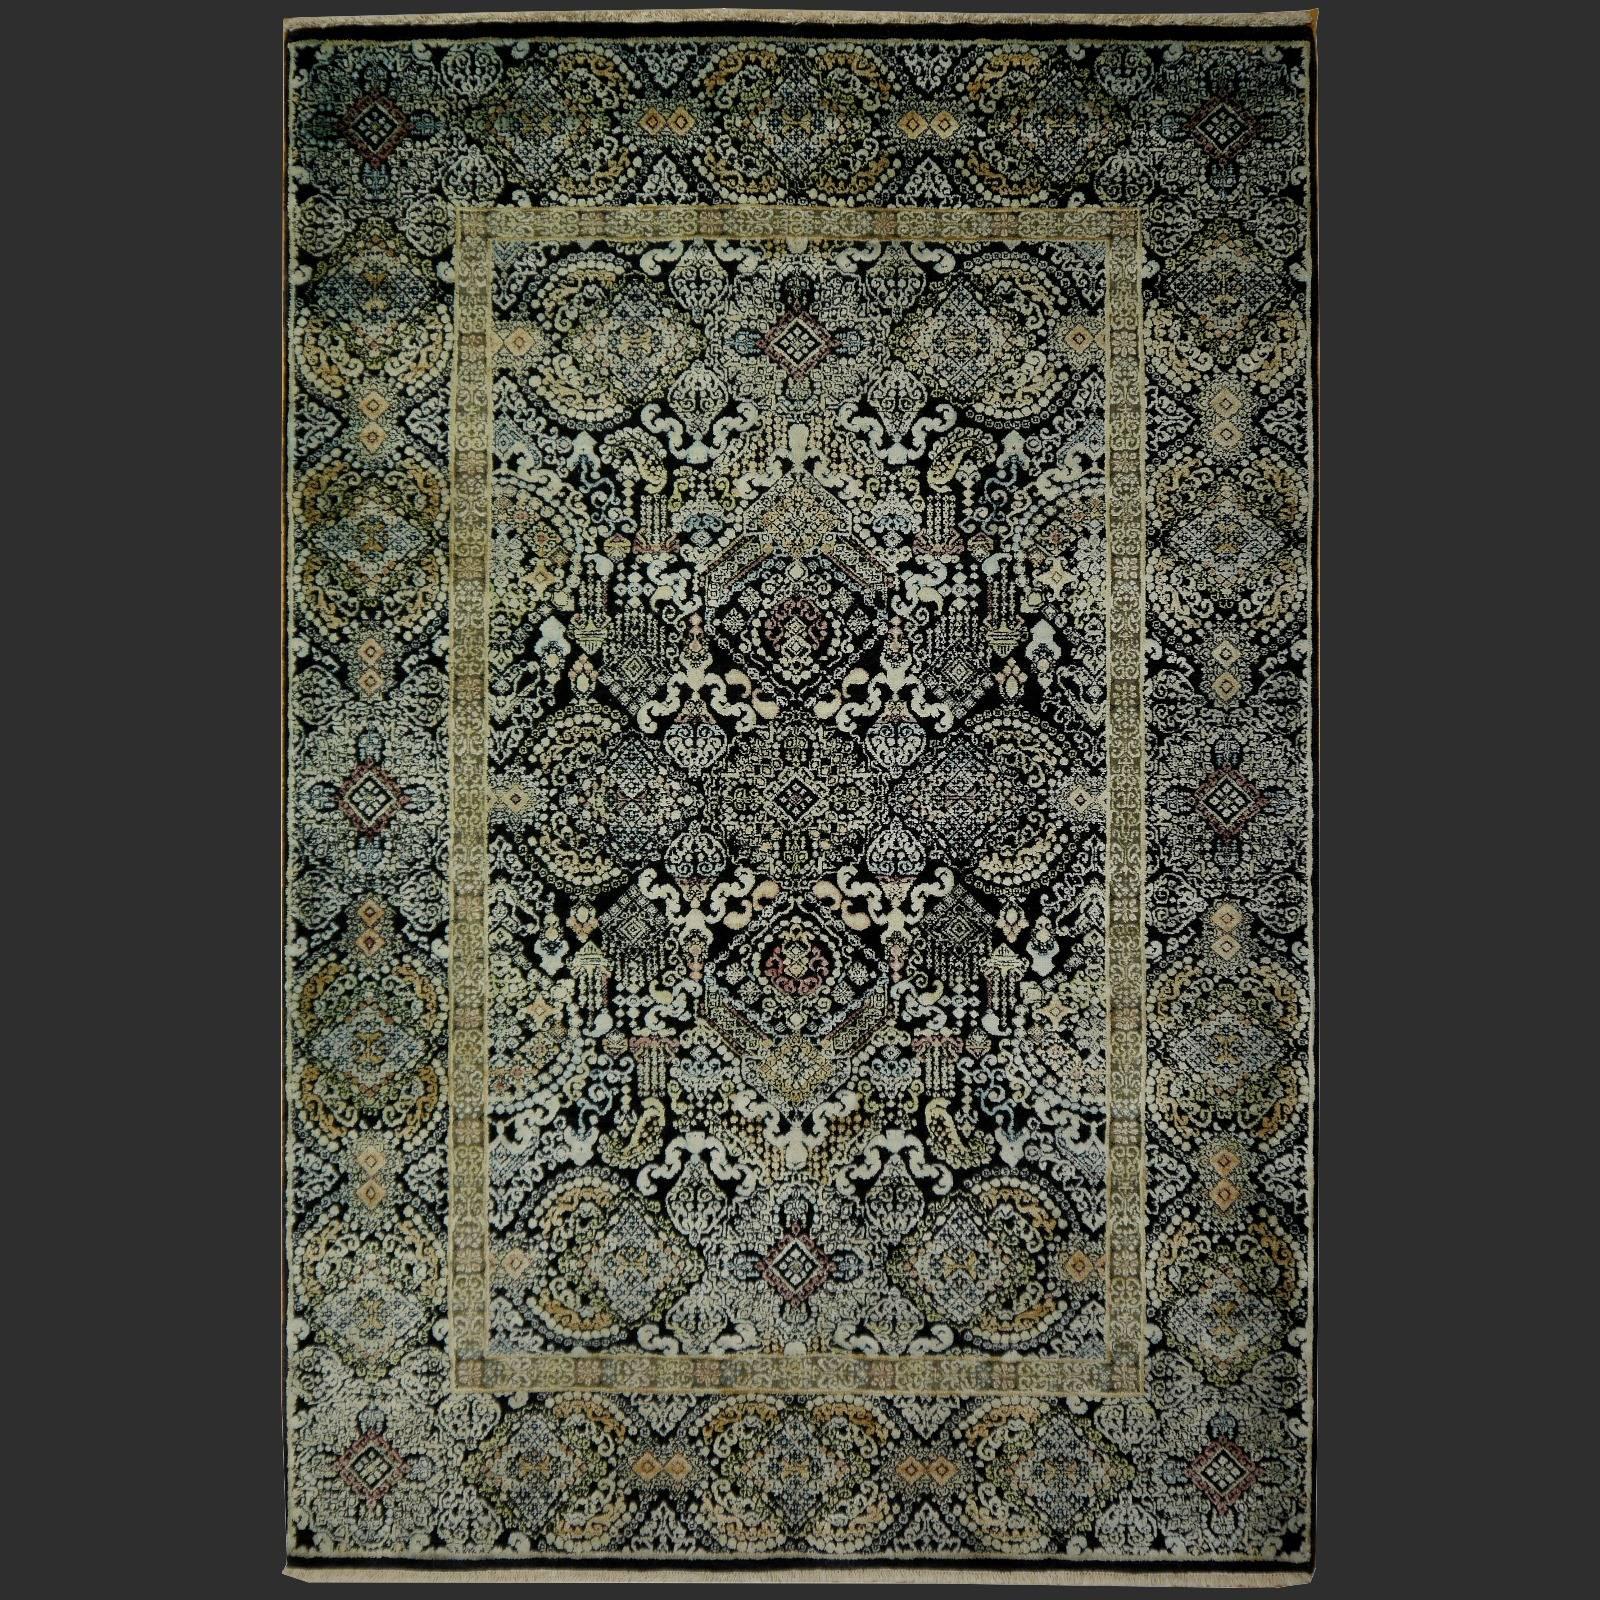 Contemporary Kohinoor Hand-Knotted Wool and Silk Rug from India Black Gold Green 